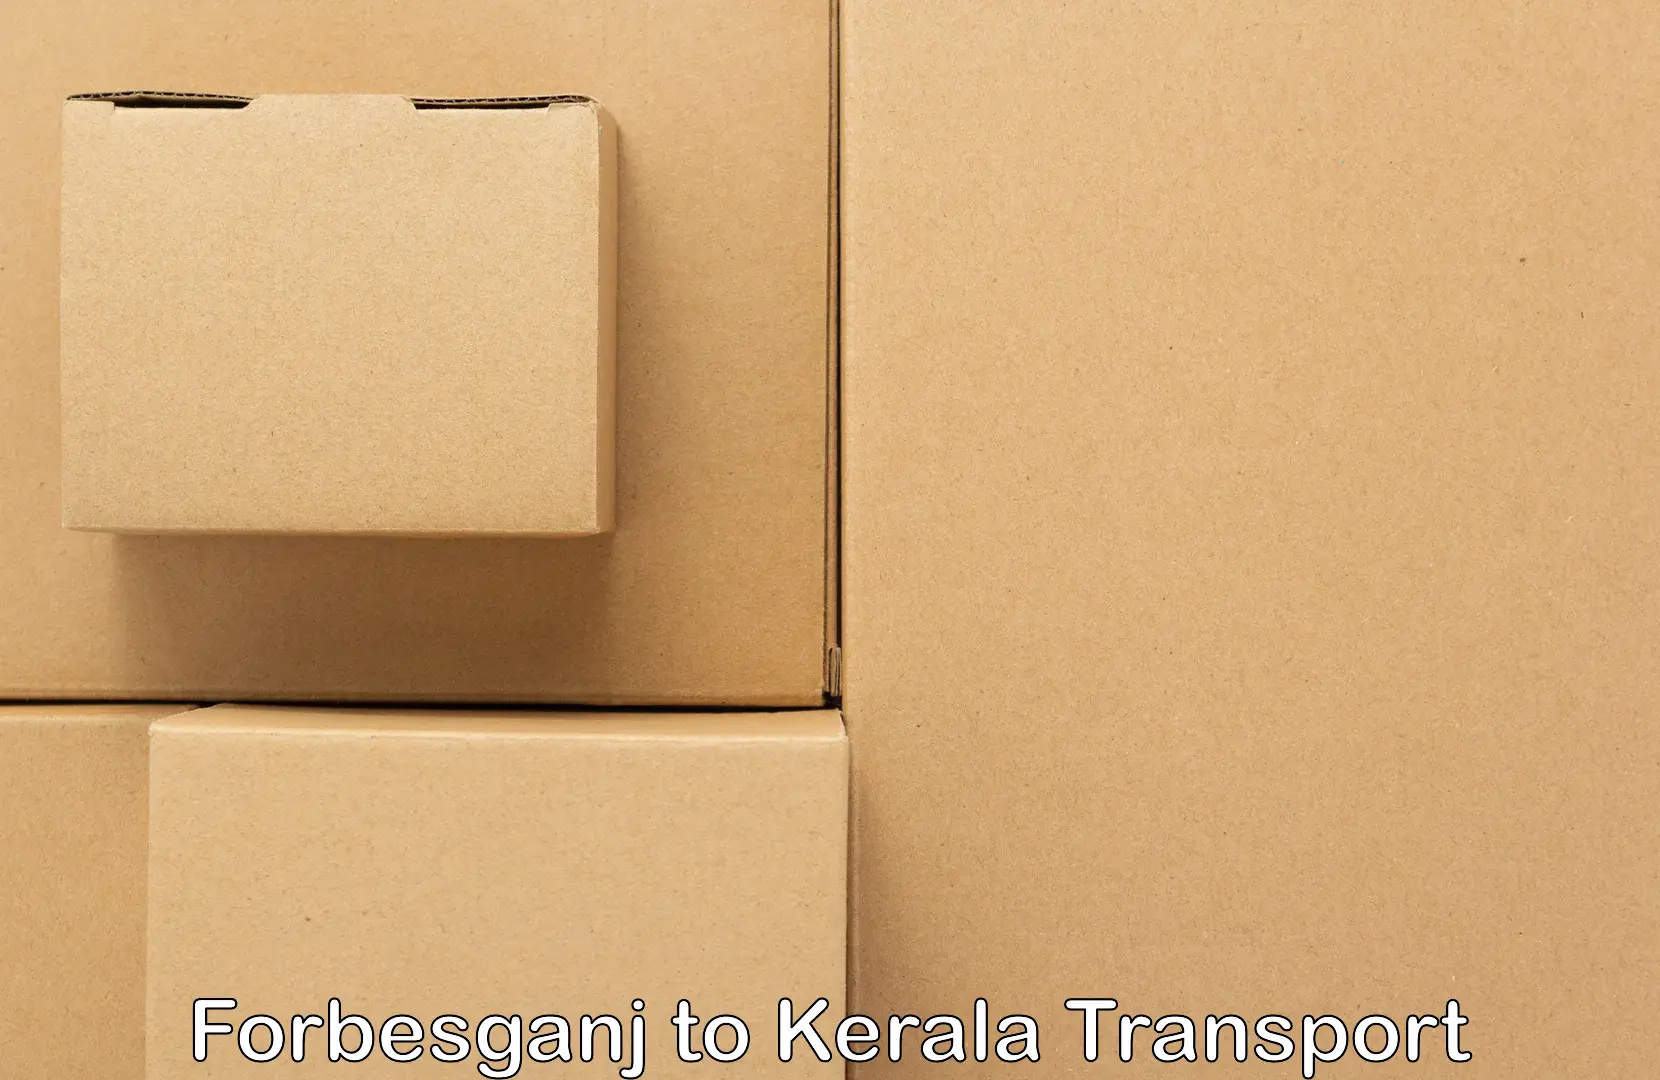 Truck transport companies in India Forbesganj to Pala